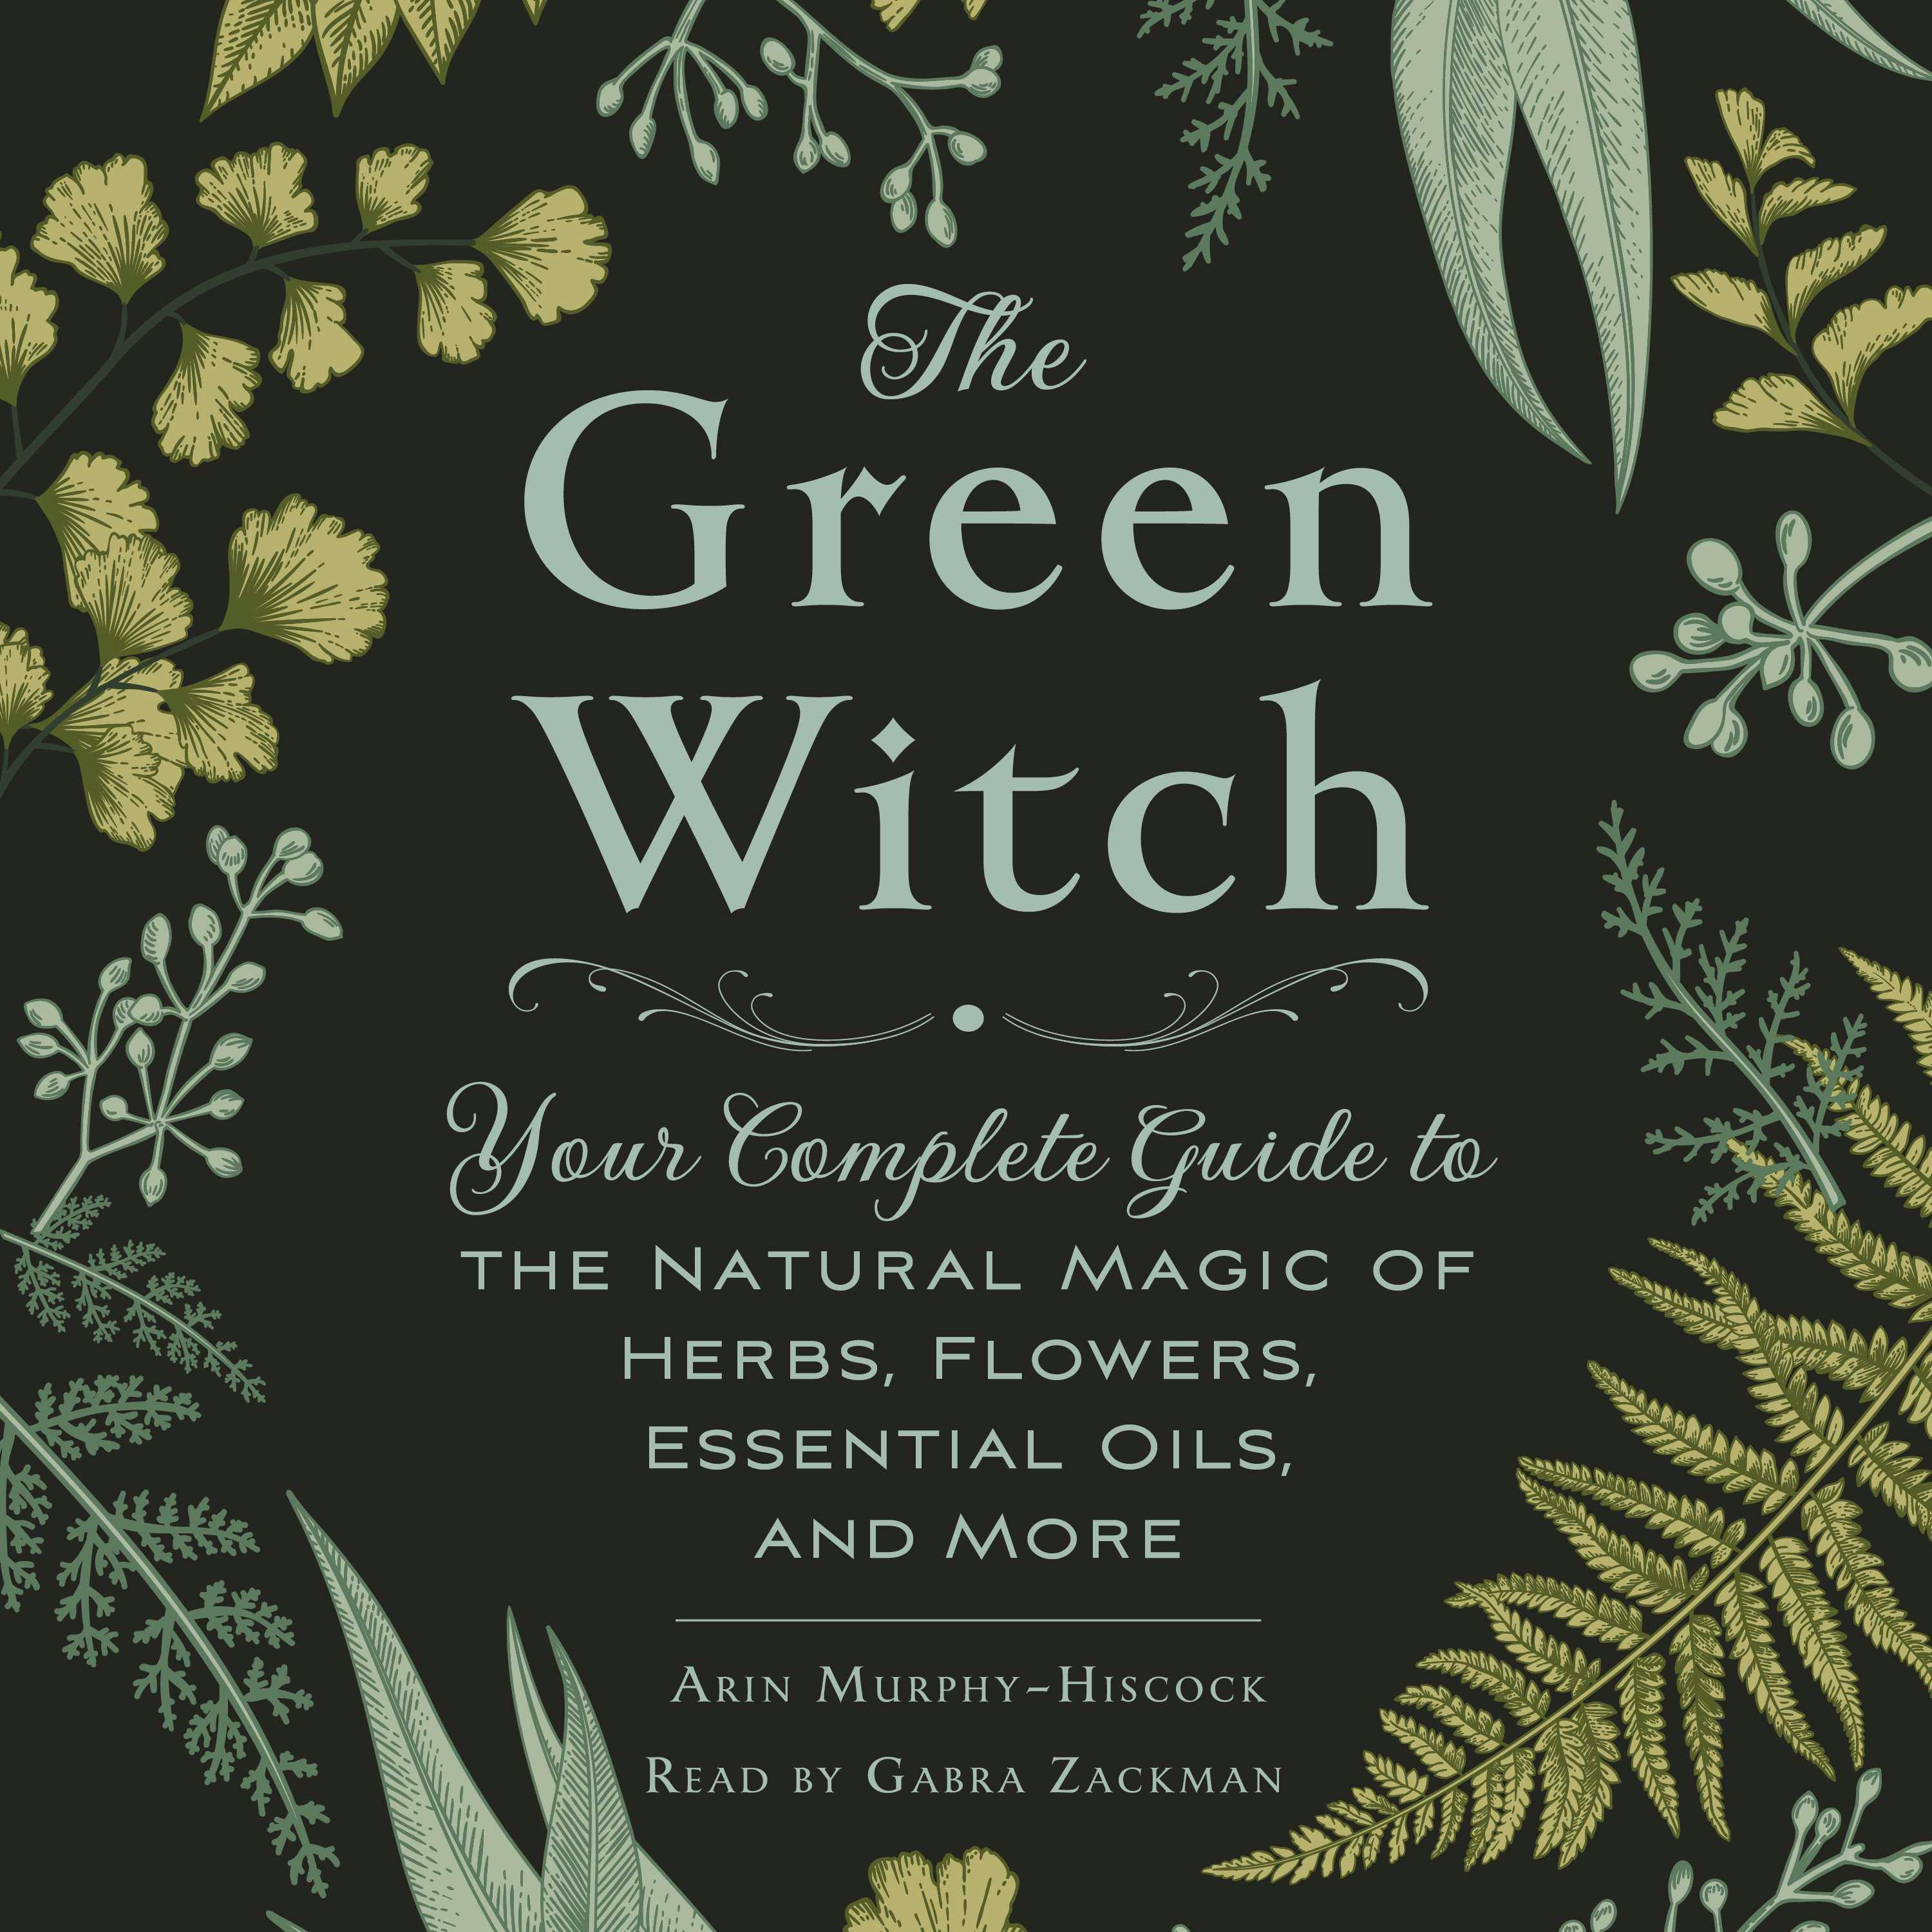 The Green Witch: Your Complete Guide to the Natural Magic of Herbs, Flowers, Essential Oils, and More - undefined